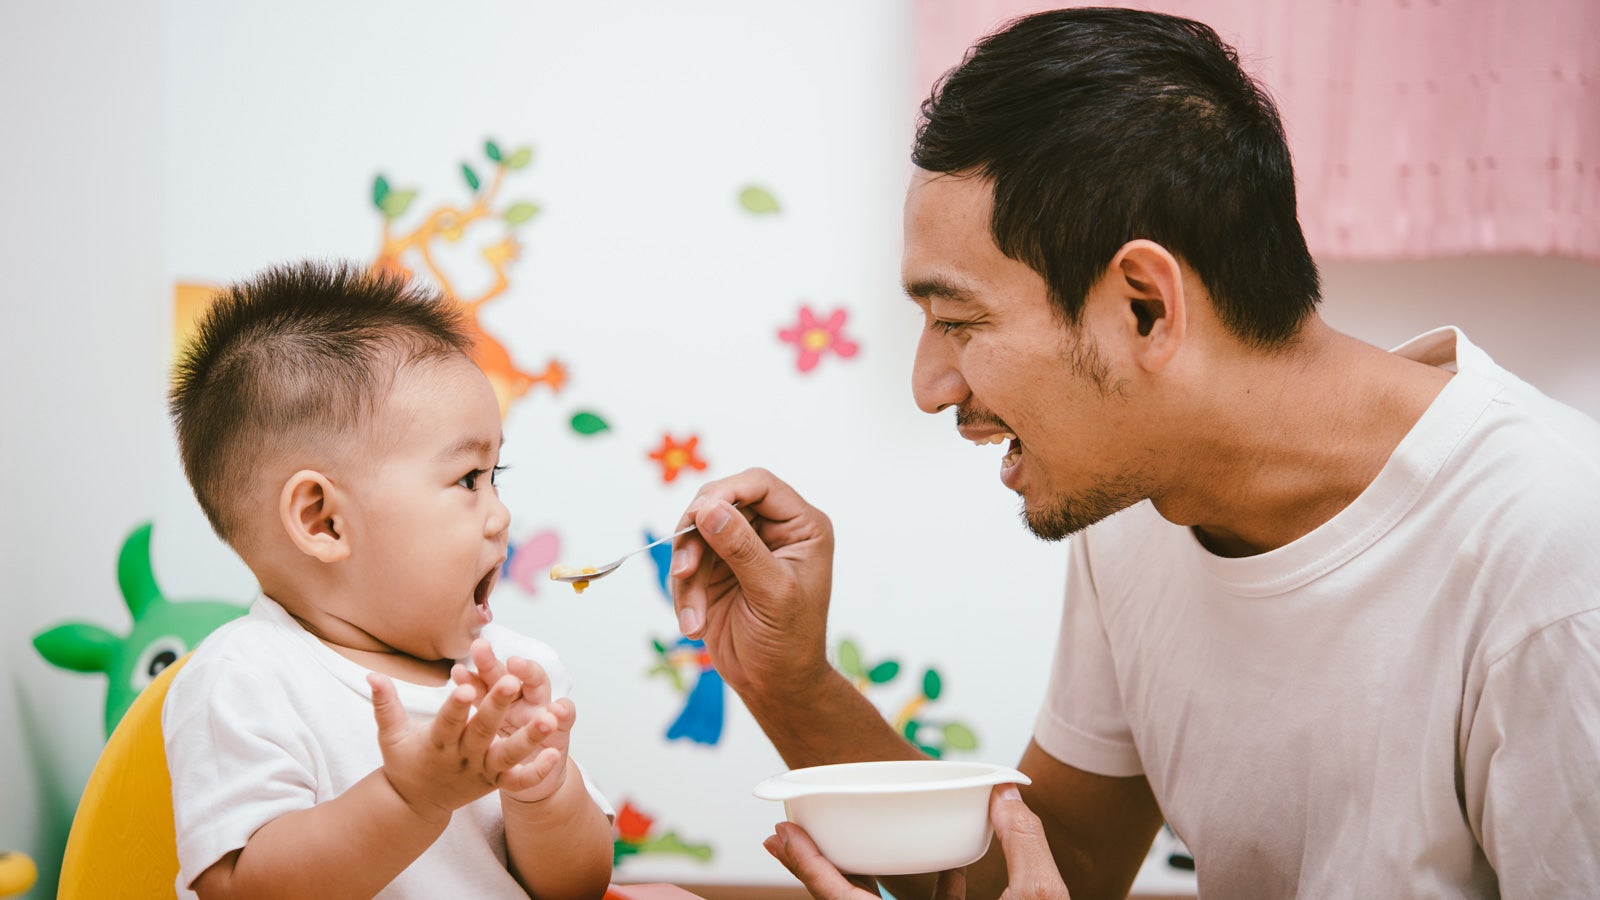 A smiling father feeding his toddler